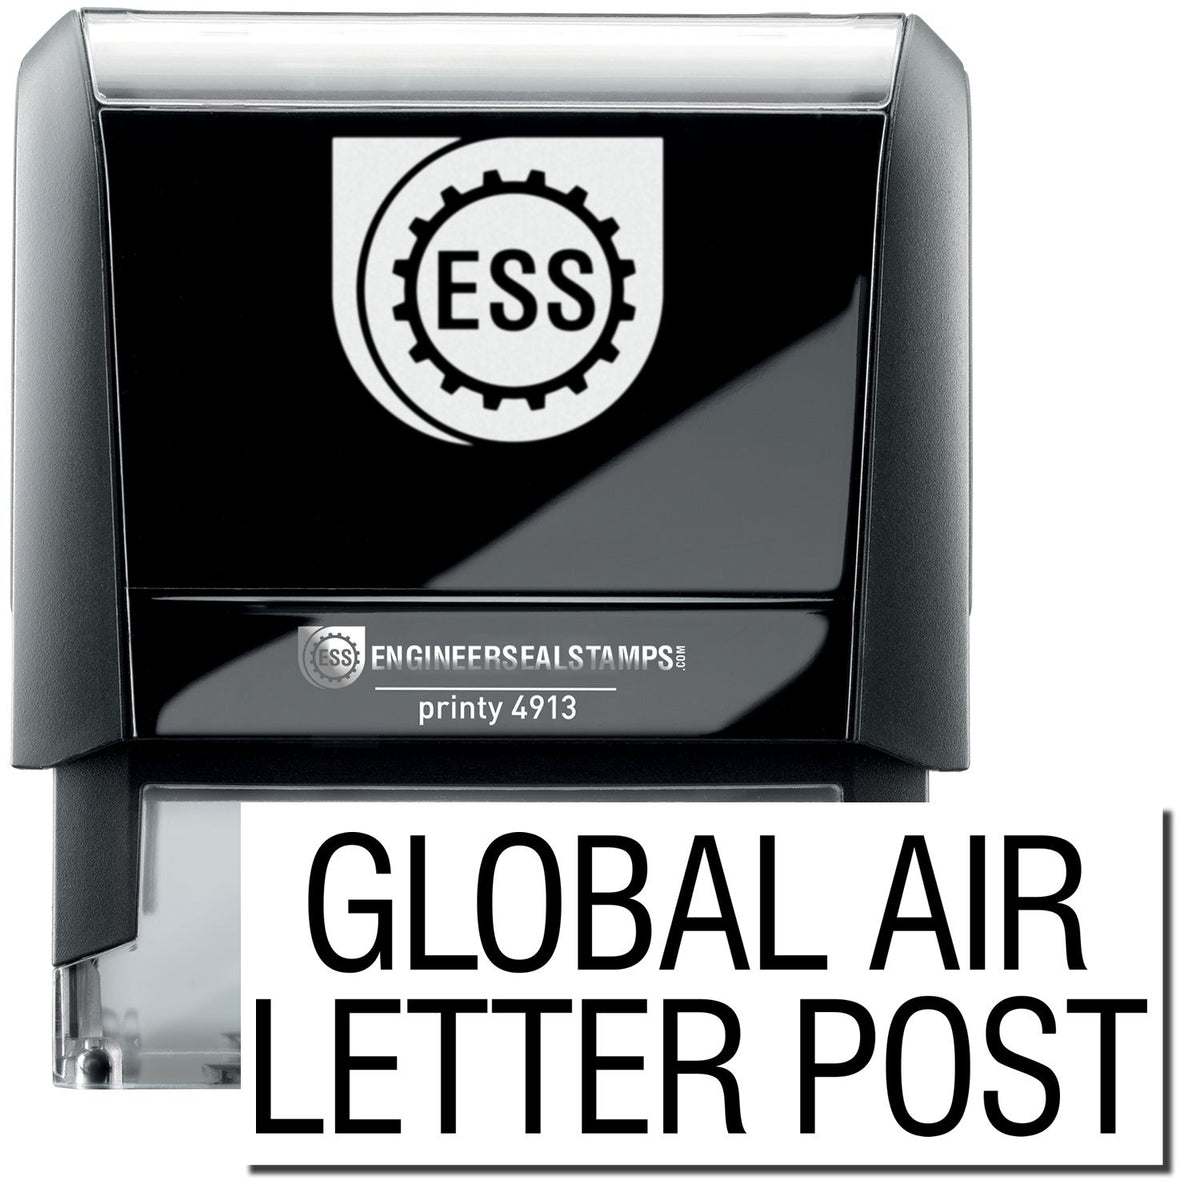 A self-inking stamp with a stamped image showing how the text &quot;GLOBAL AIR LETTER POST&quot; in a large font is displayed by it after stamping.